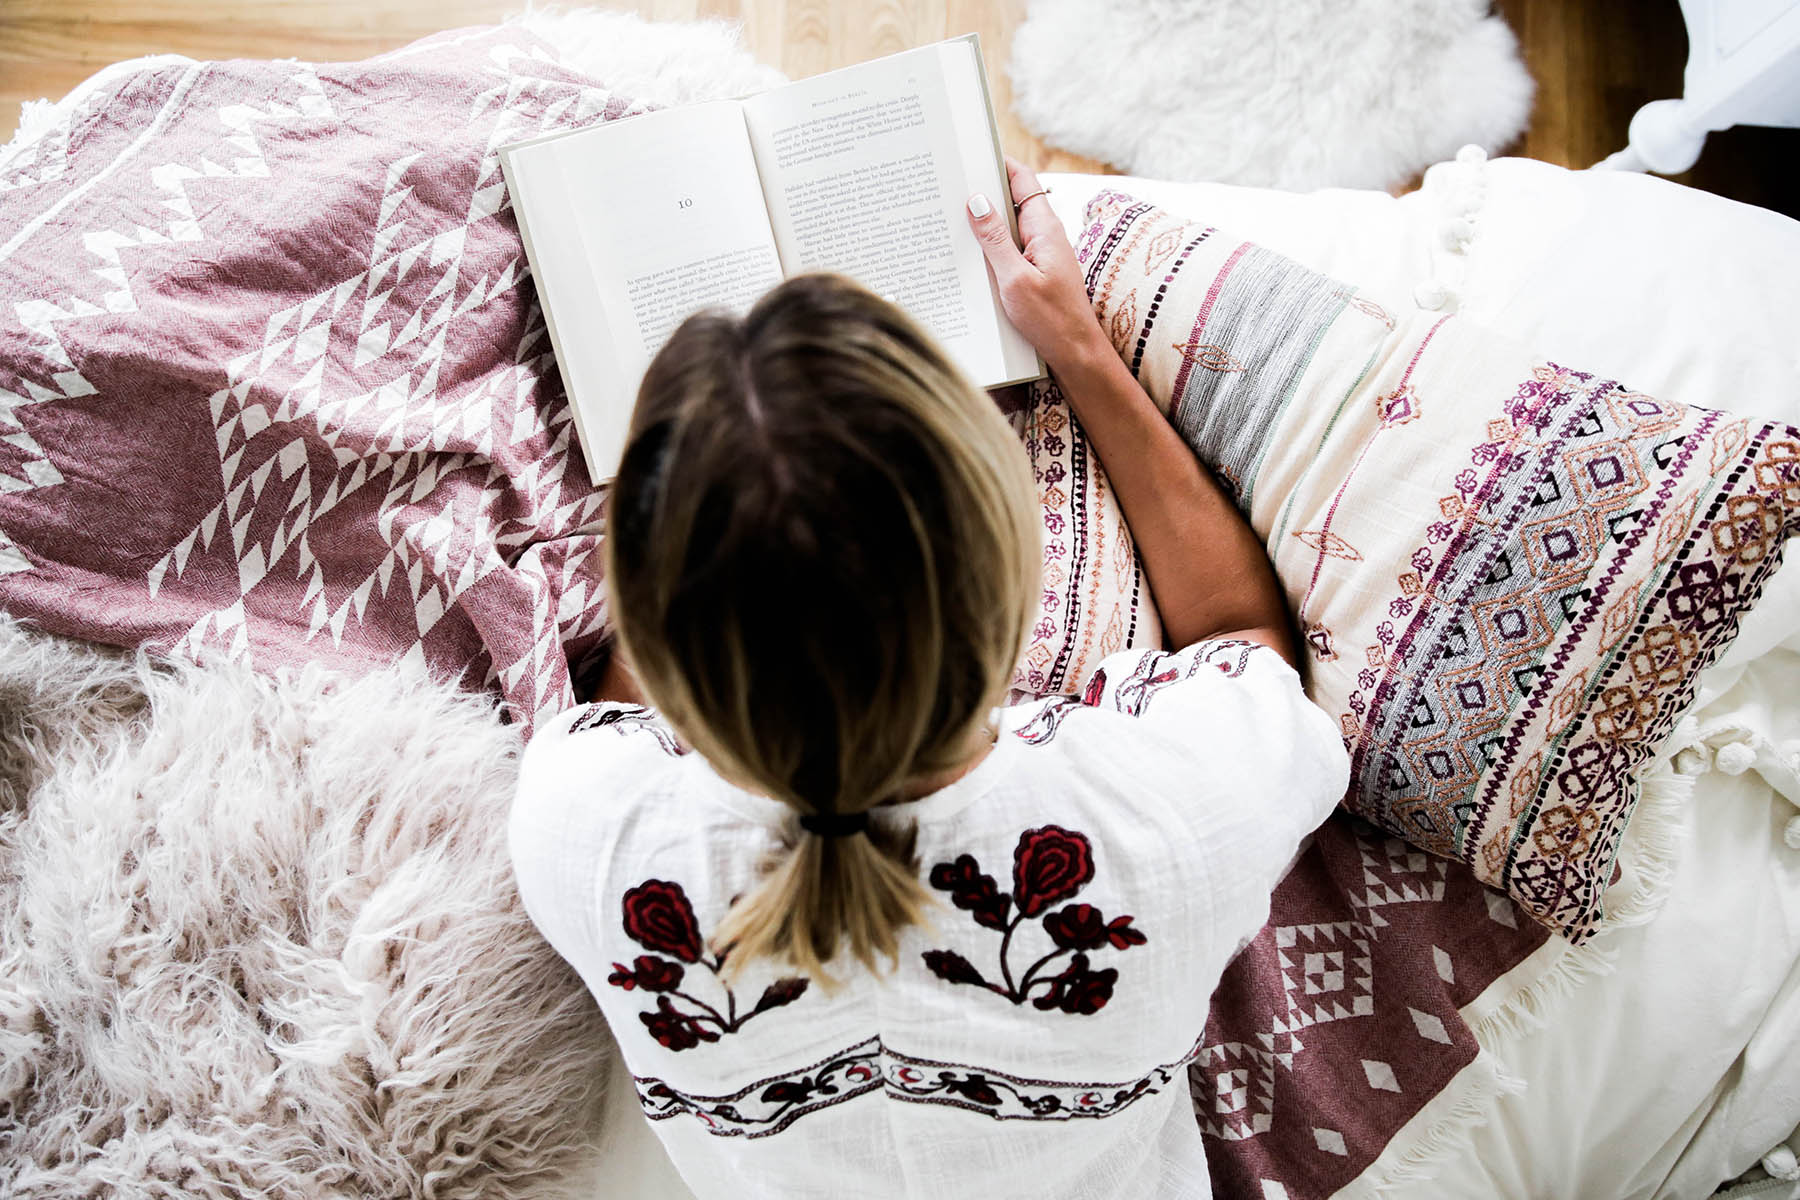 Amanda Holstein reading in bed with Urban Outfitters Urban Outfitters bedroom with Magical Thinking Pom-Fringe Duvet Cover and Agda Printed Yarn Pillow